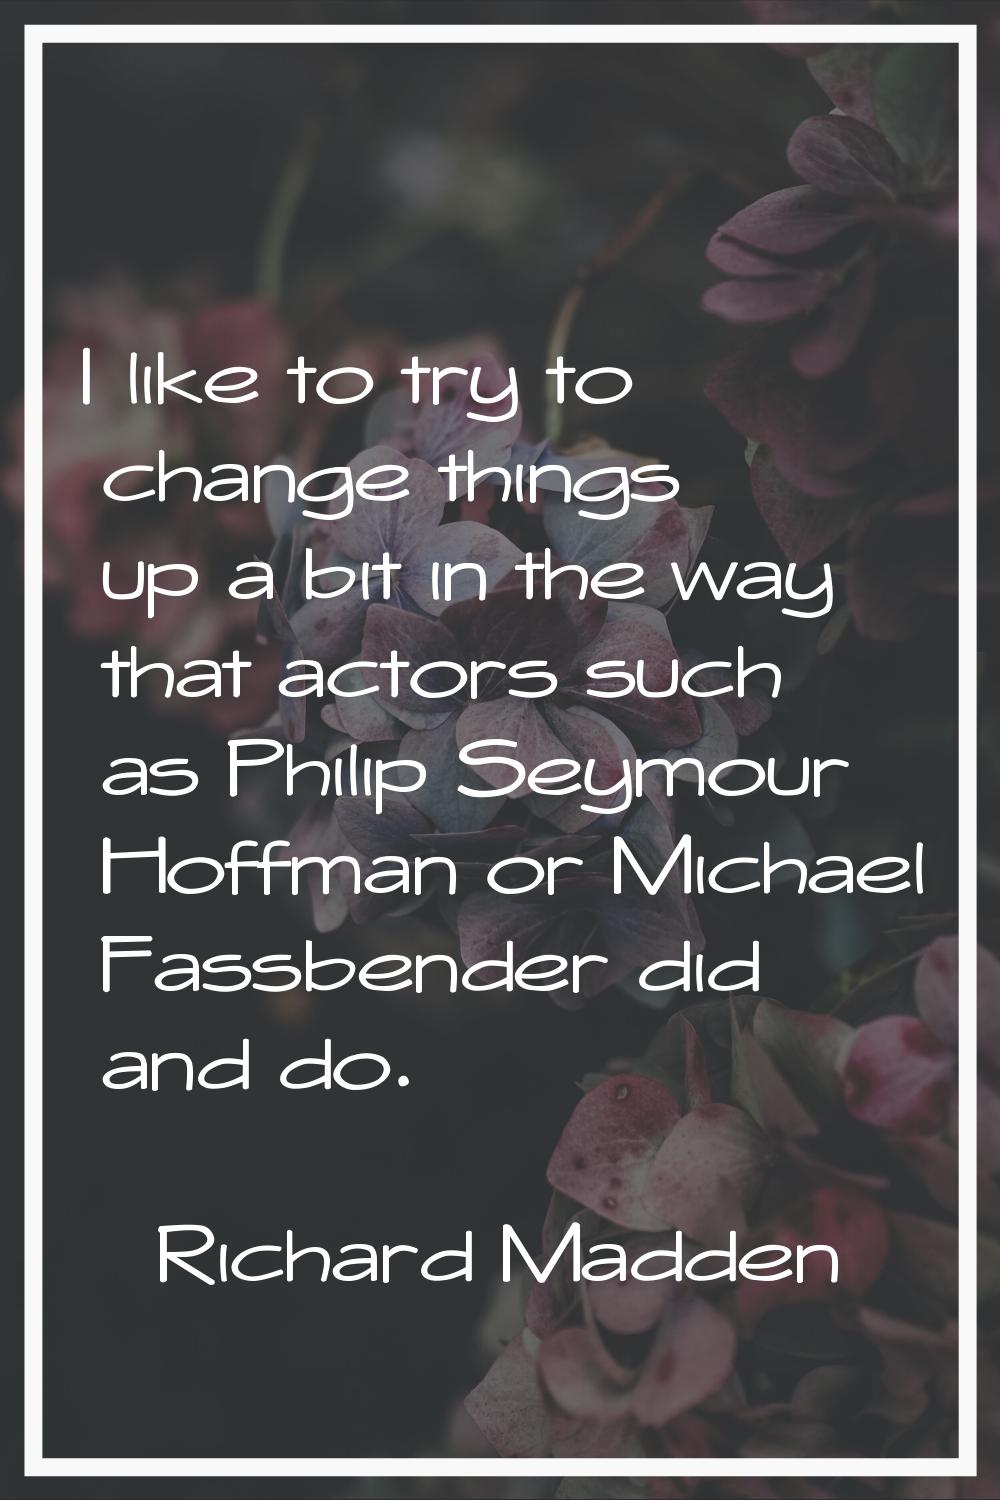 I like to try to change things up a bit in the way that actors such as Philip Seymour Hoffman or Mi